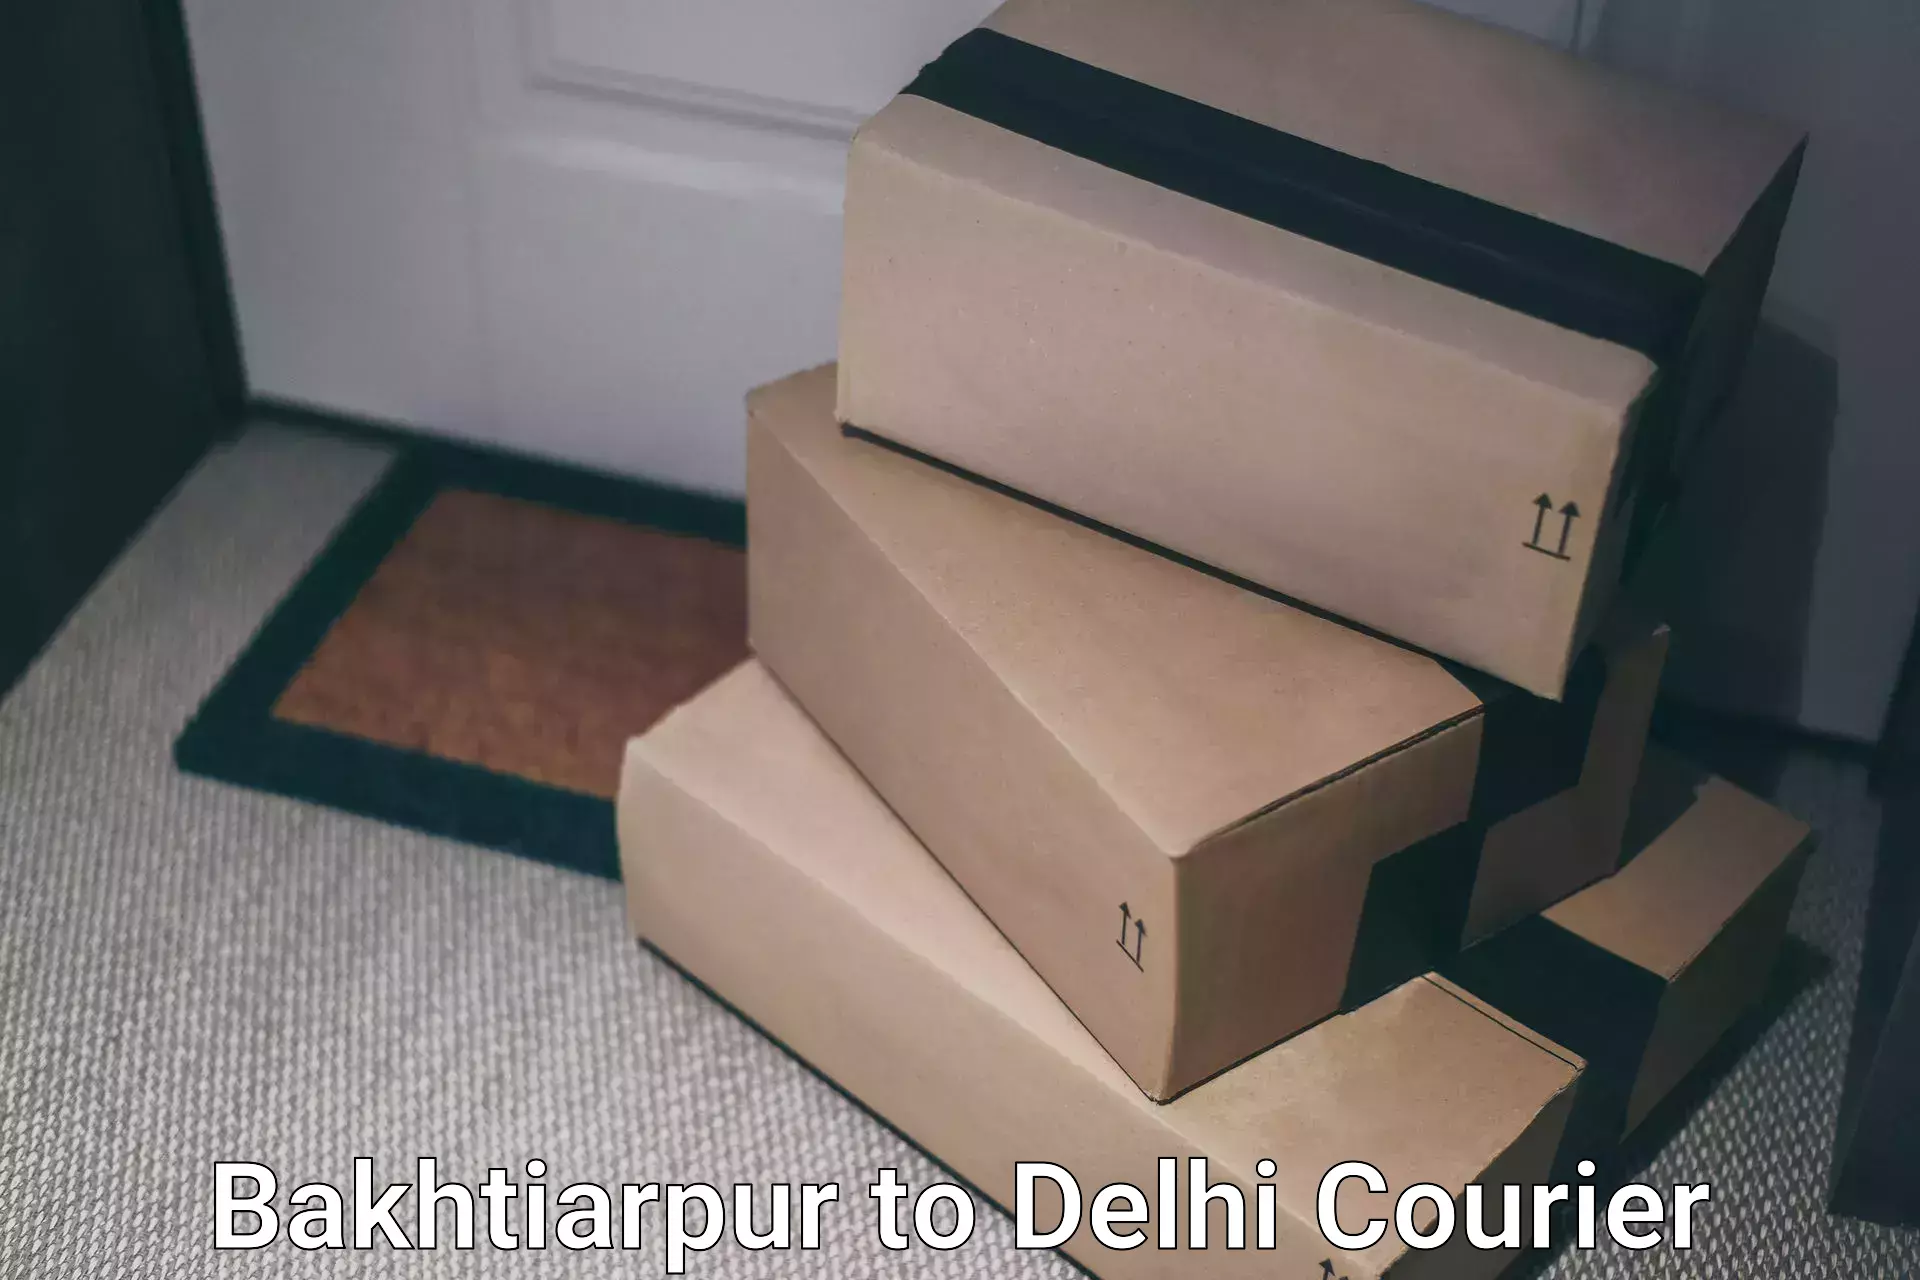 Reliable delivery network Bakhtiarpur to NCR